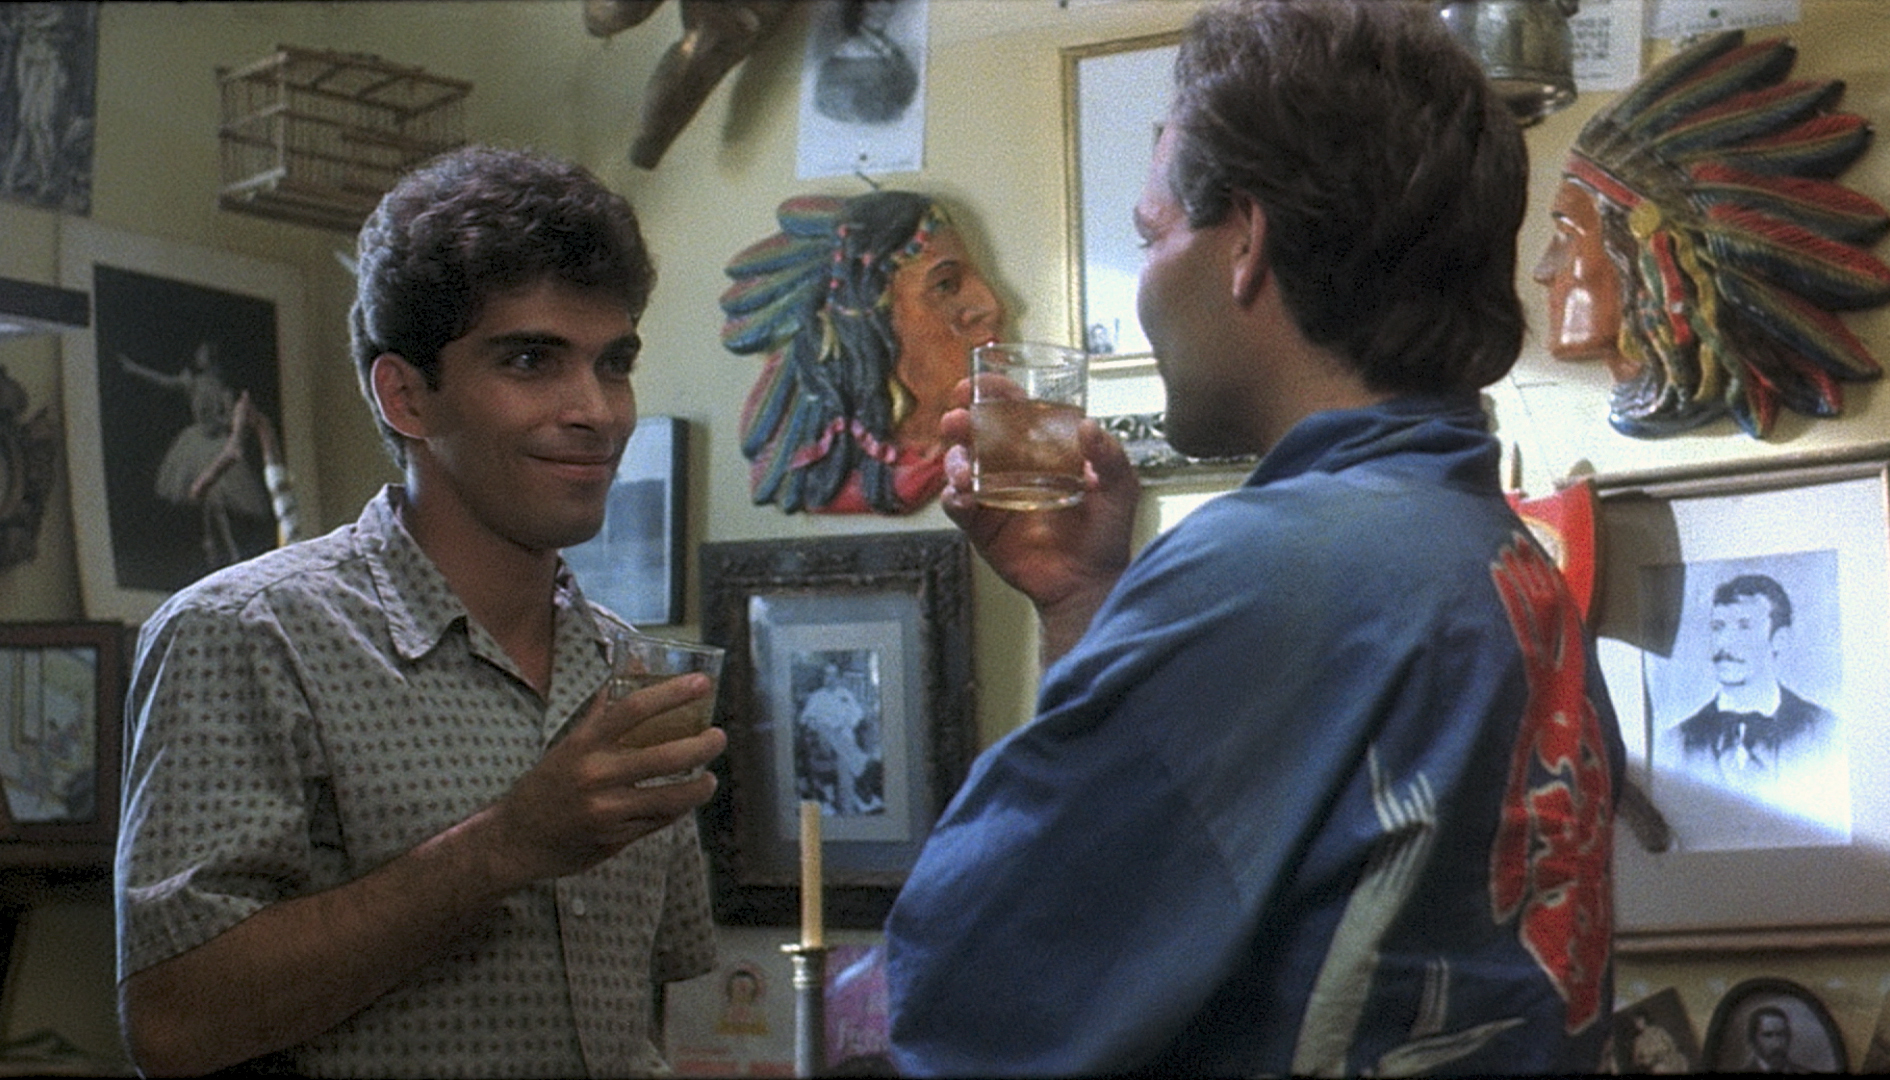 Two men stand facing eachother holding drinks in a room with many framed pictures on the wall.